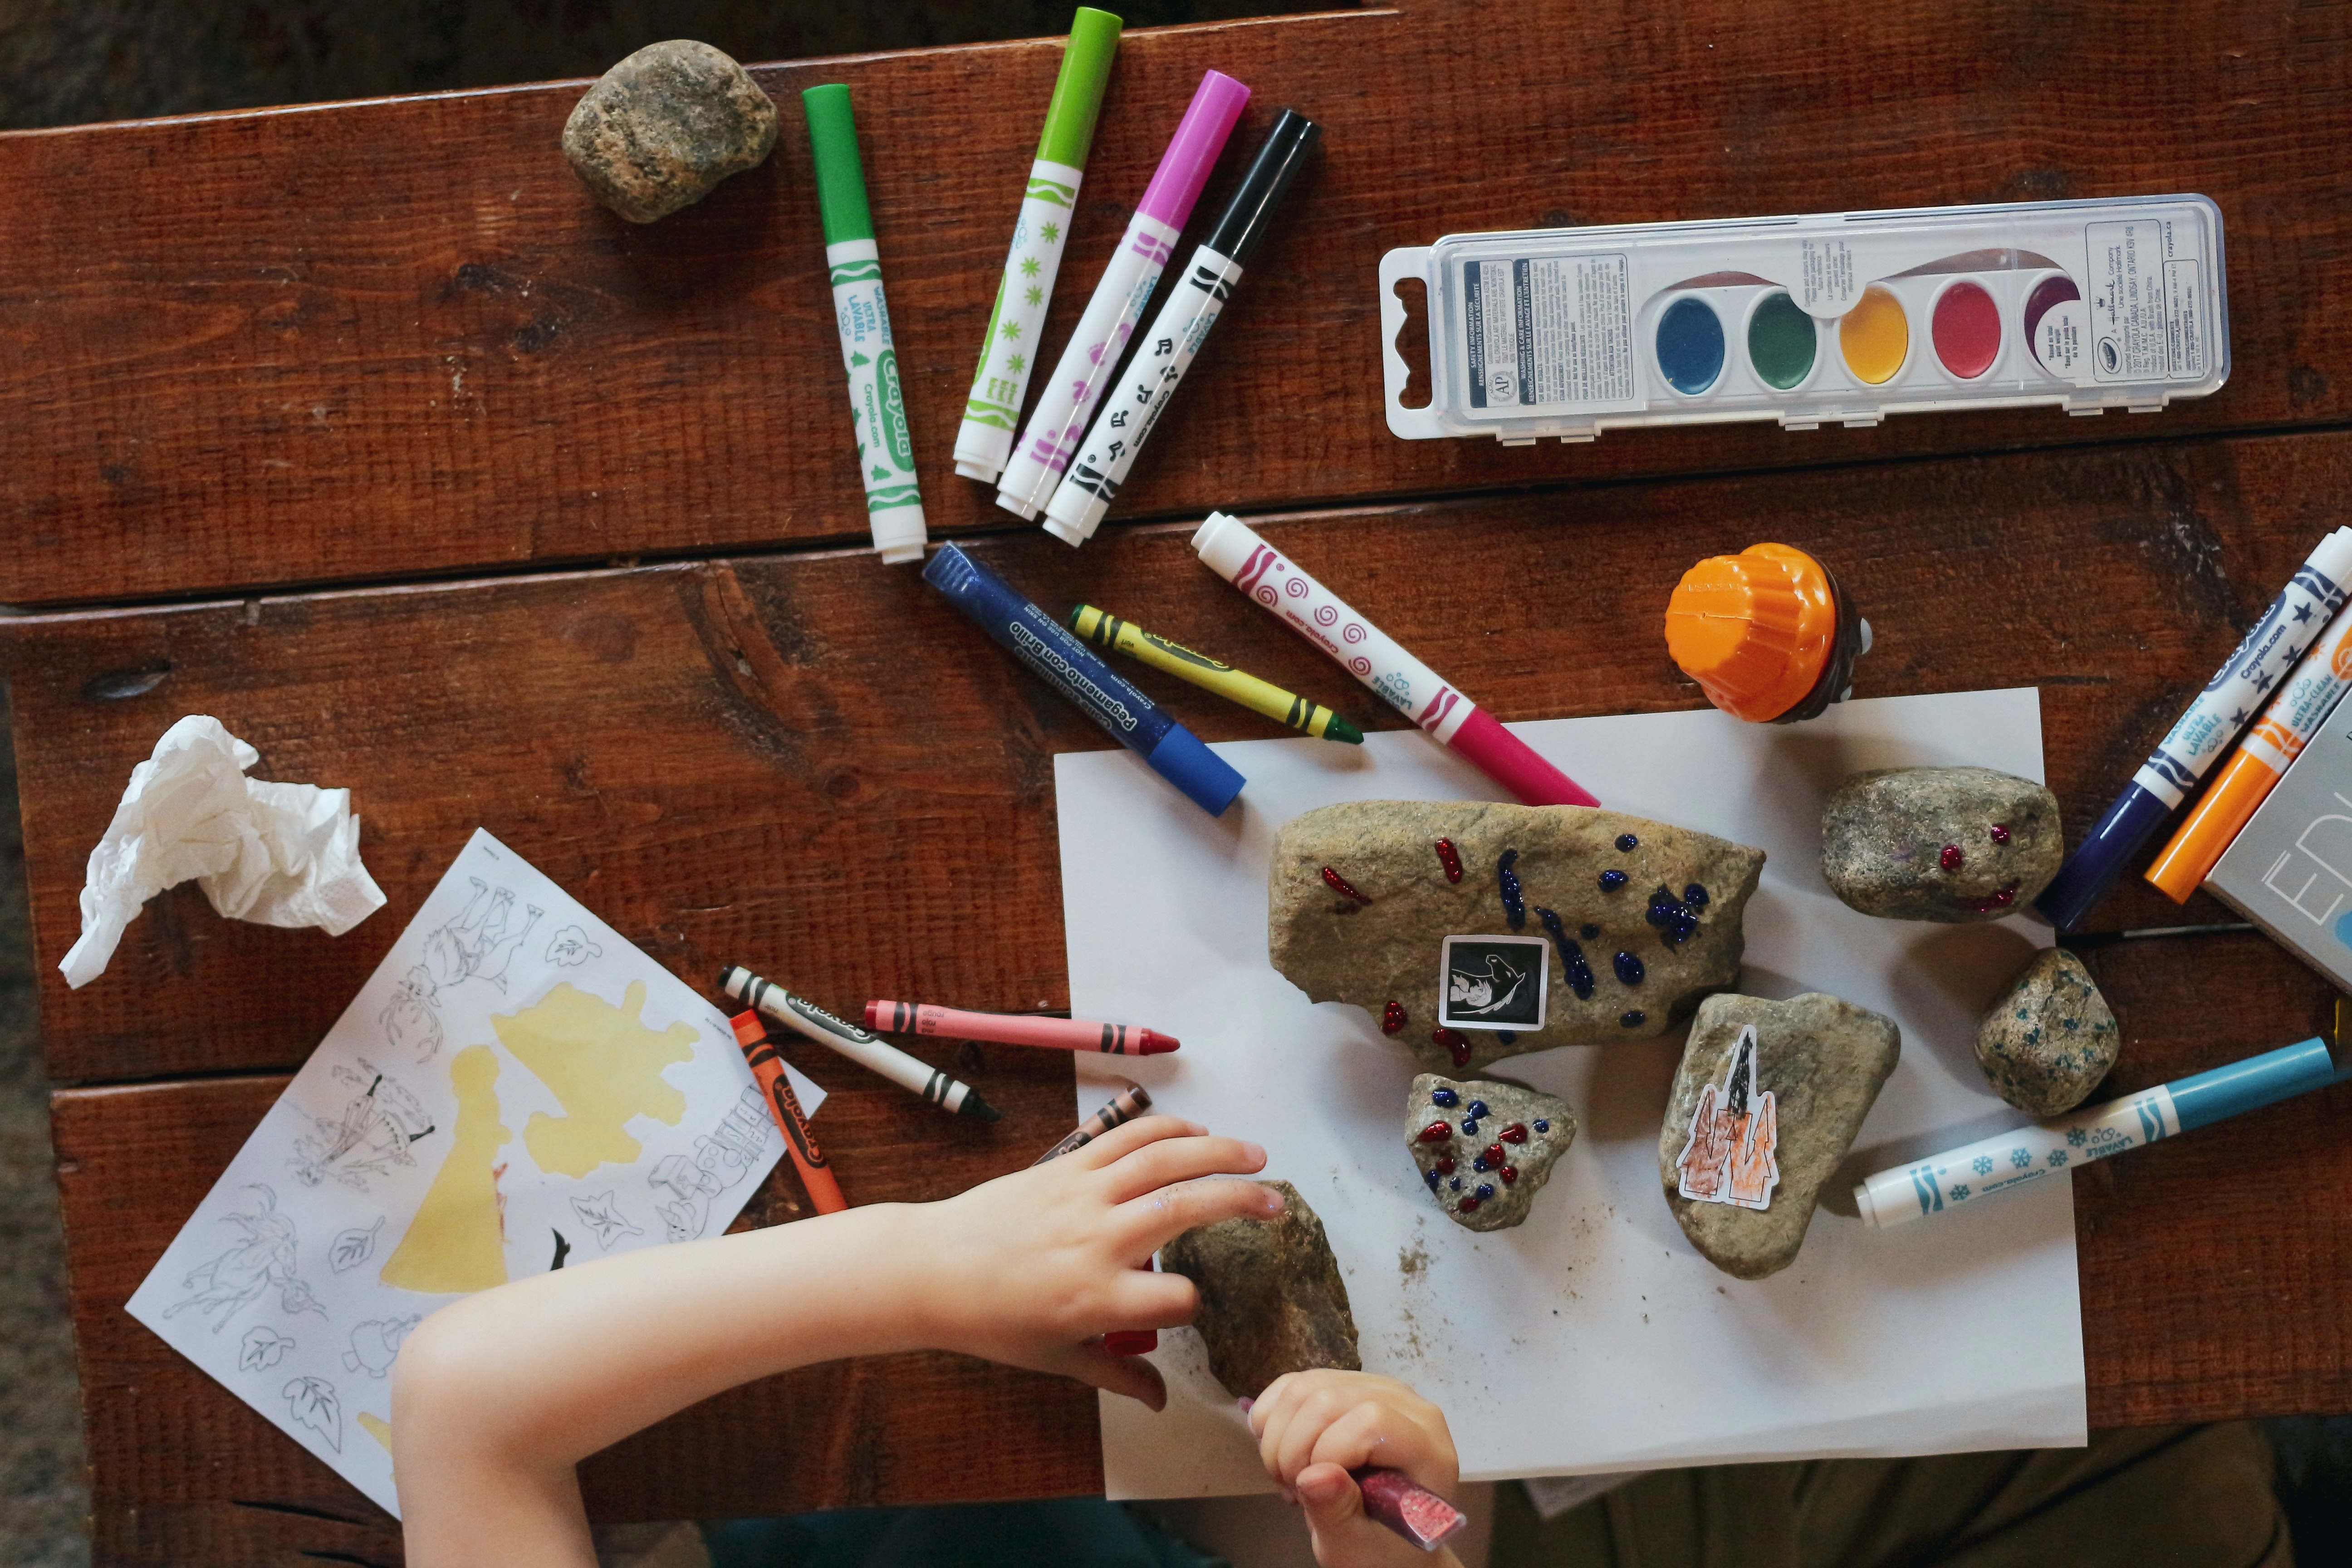 Overhead view of child painting on rocks at table